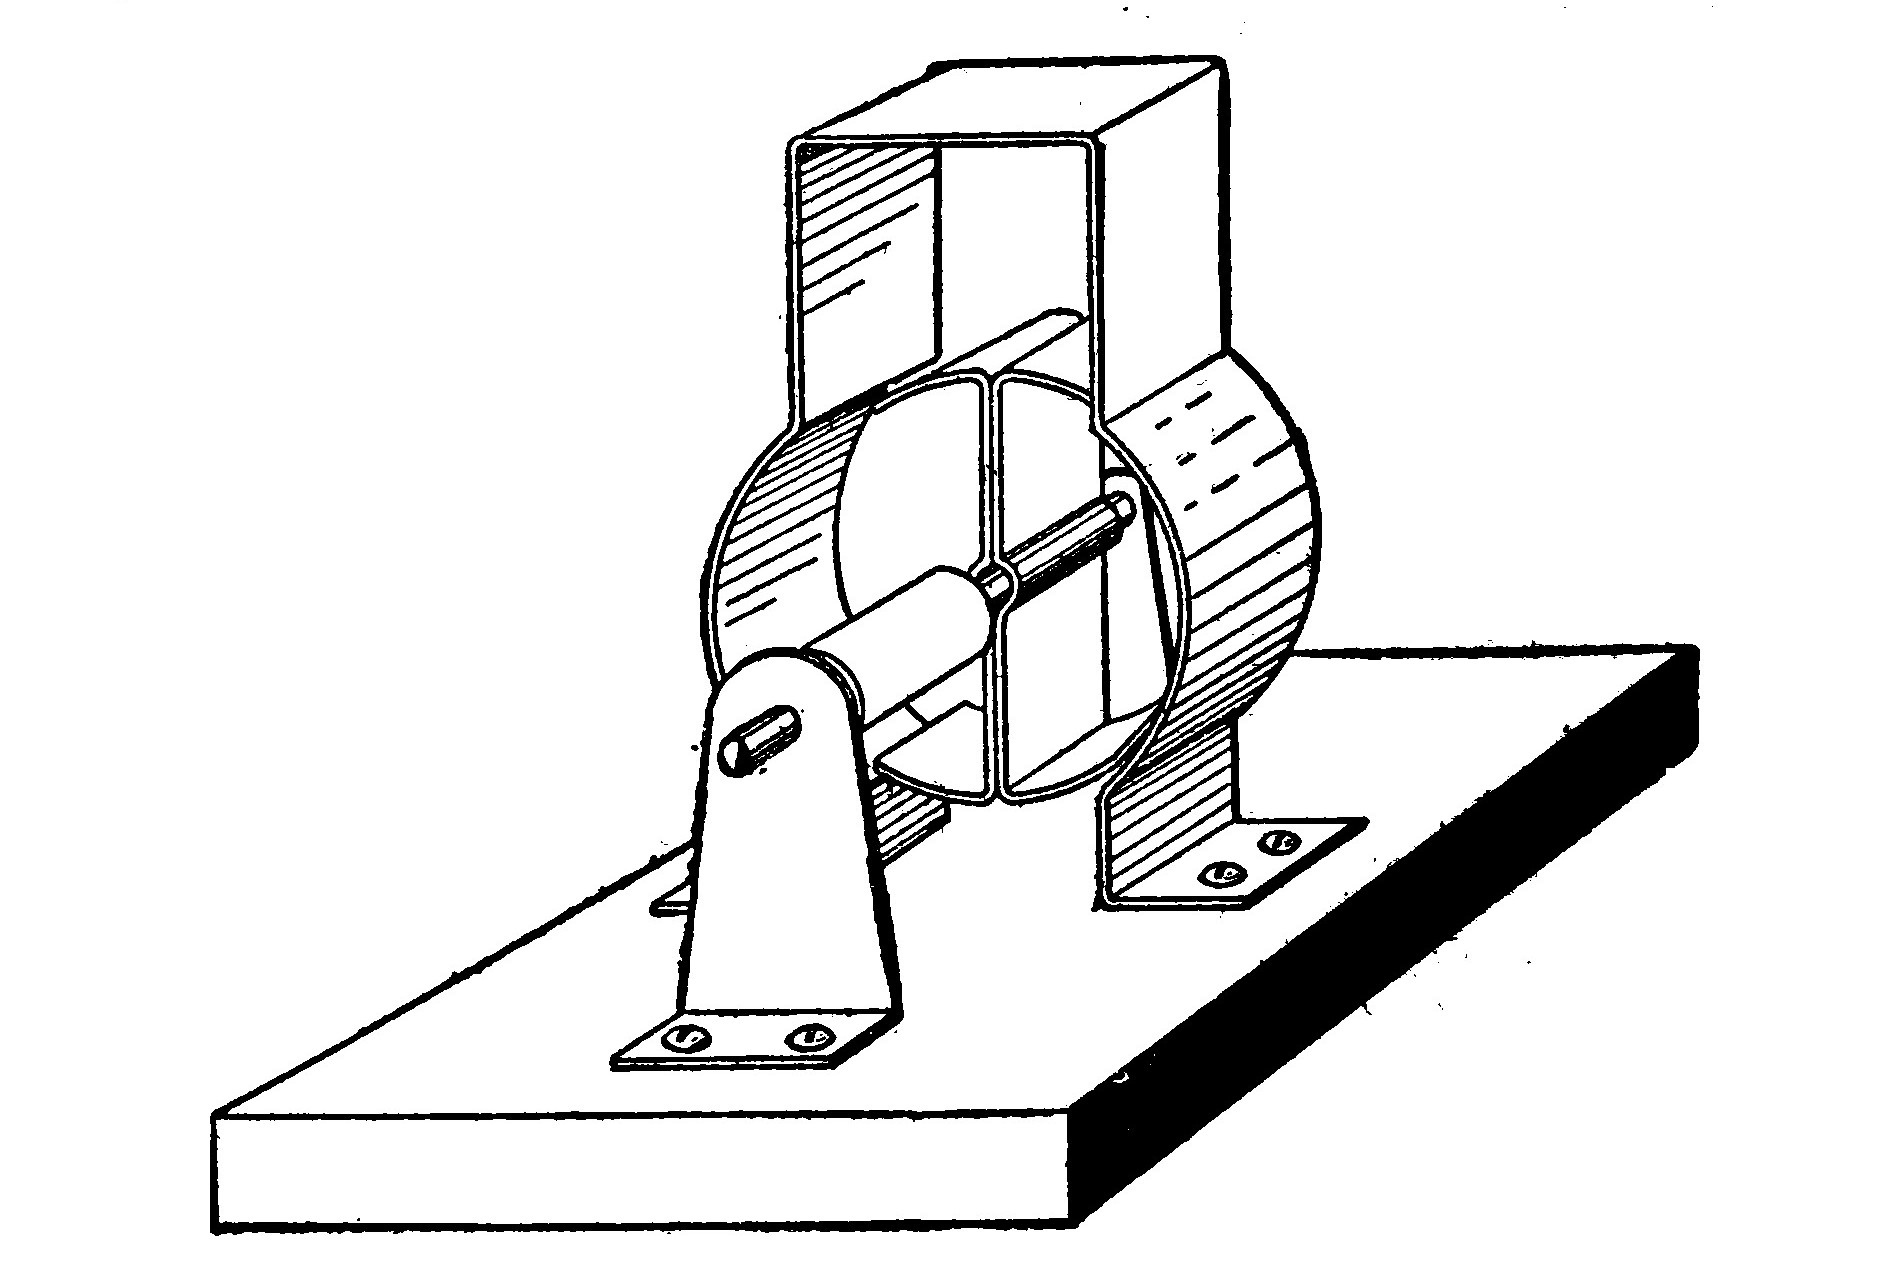 FIG. 14.—Showing the Motor assembled on the Base so that all the parts may be lined up before winding.